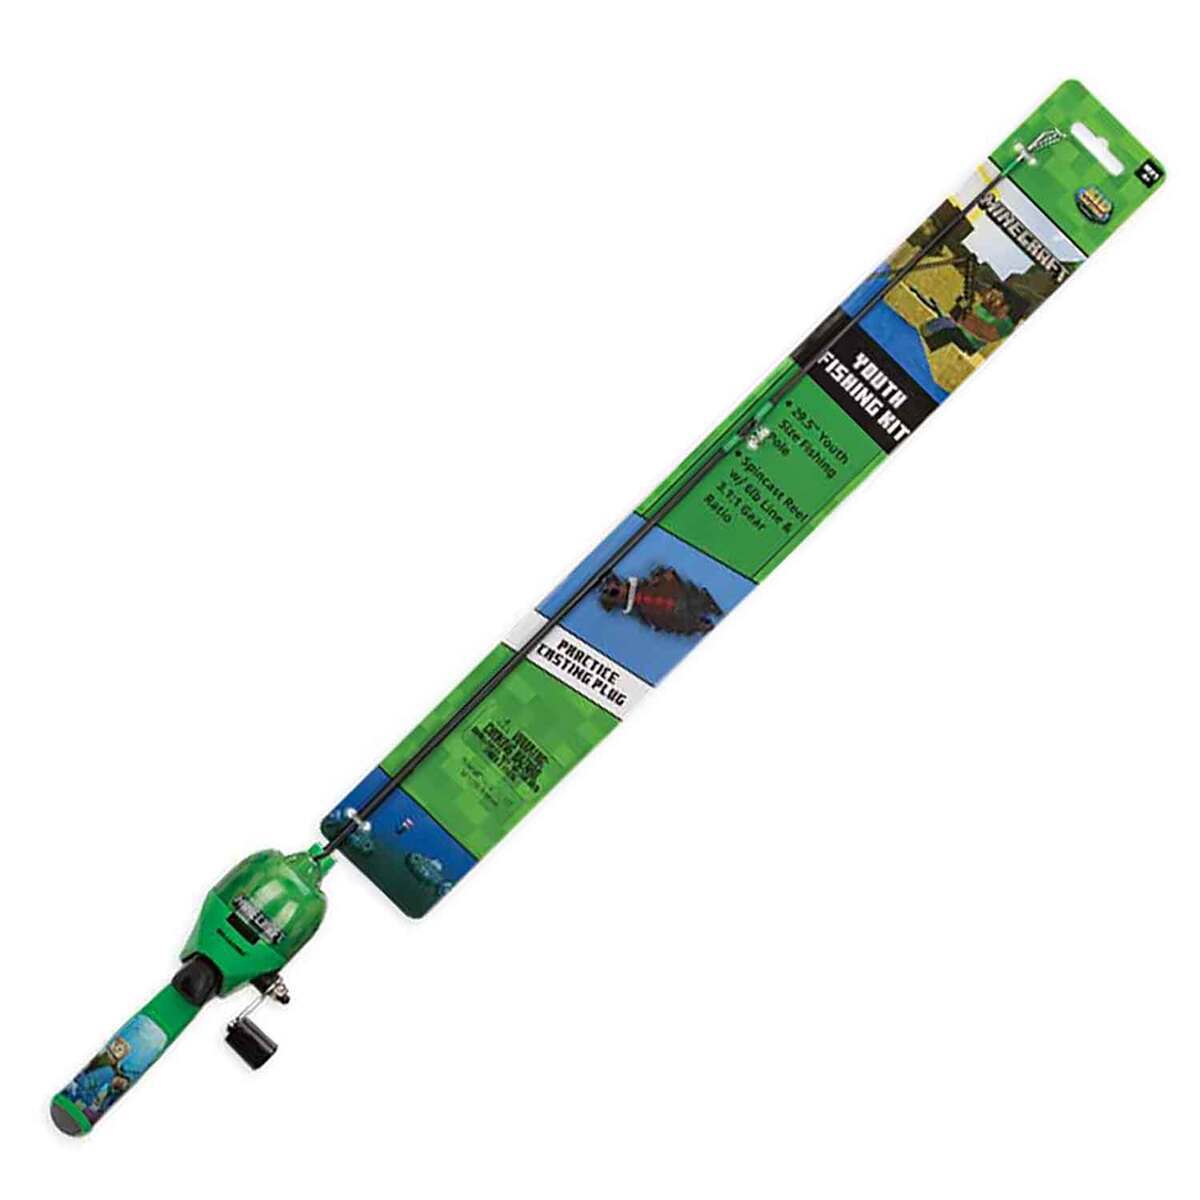 Kid Casters Pj Masks Youth Fishing Combo